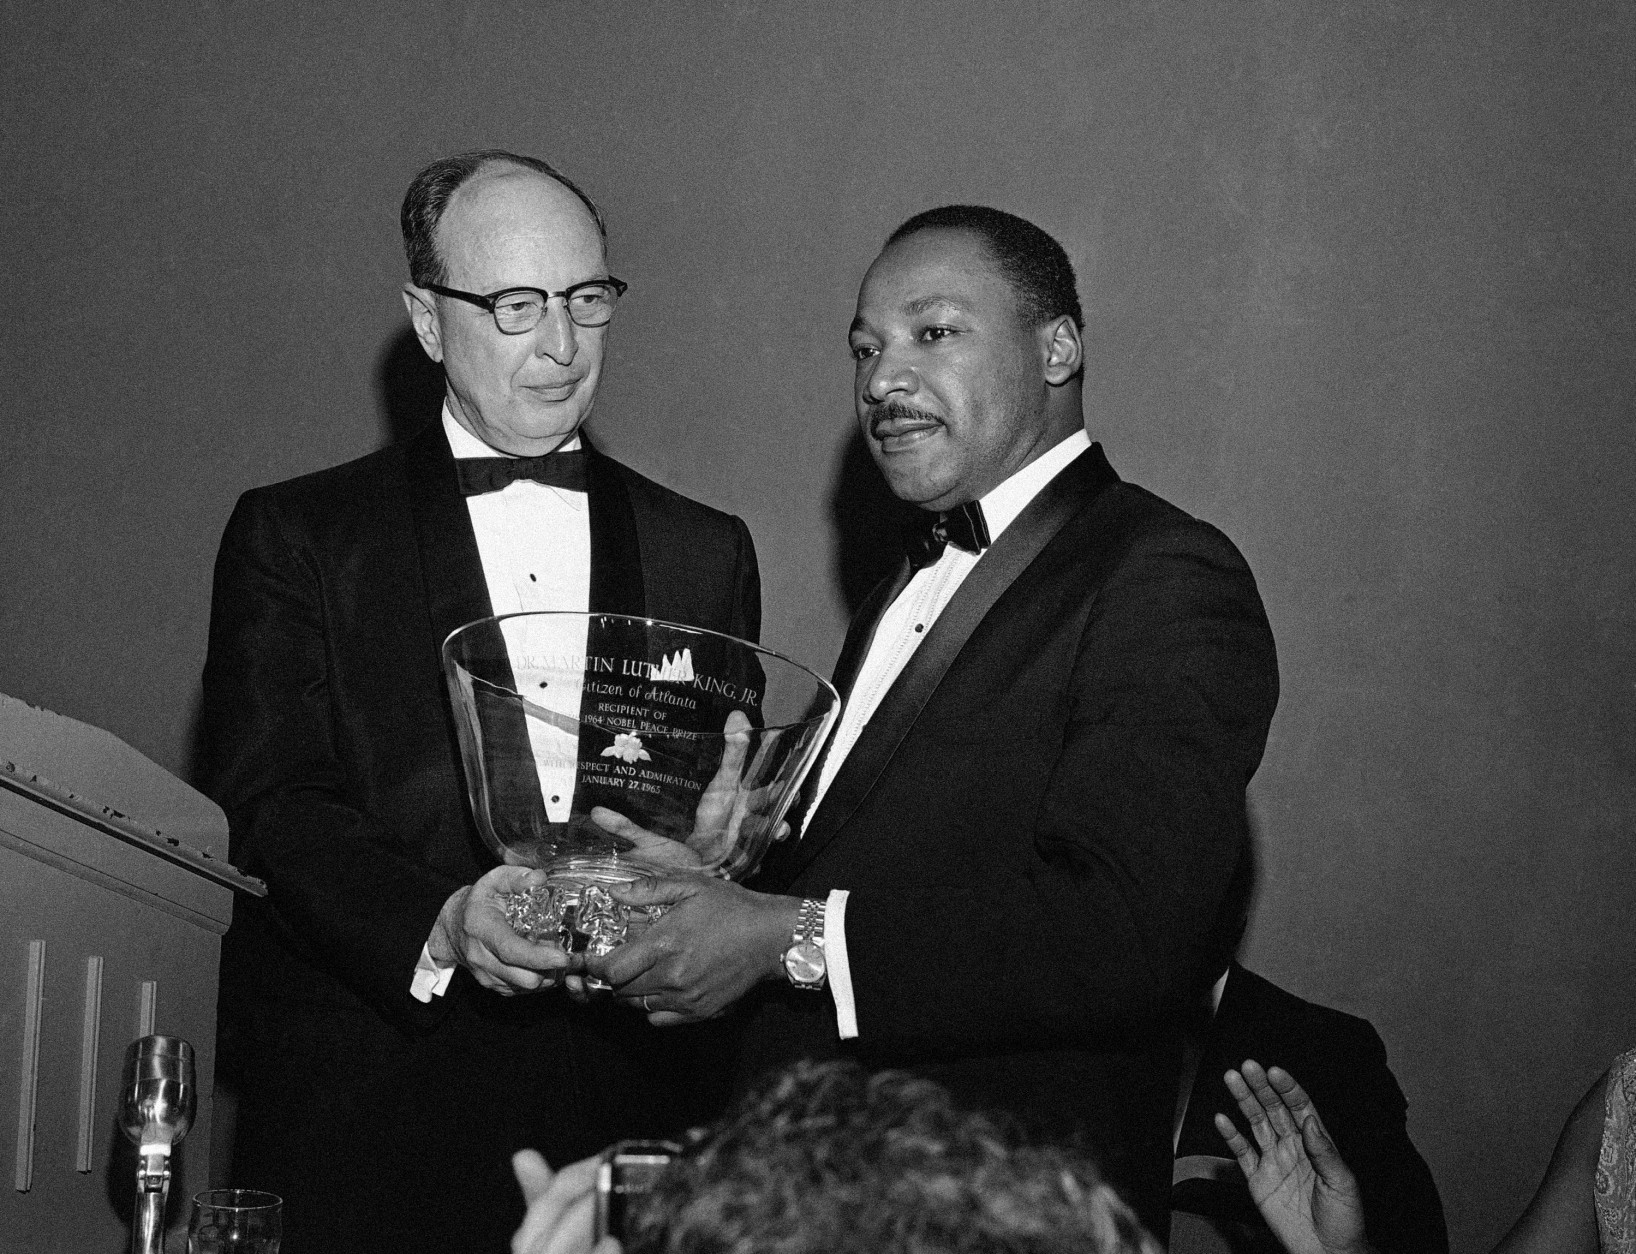 Civil rights leader Dr. Martin Luther King Jr., right, winner of the 1964 Nobel Peace Prize, receives a glass bowl inscribed to him as a "Citizen of Atlanta, with respect and admiration," from Rabbi Jacob Rothschild of the Temple Synagogue in Atlanta, Jan. 28, 1965. The award was presented at a banquet sponsored by Atlanta citizens in honor of King's receiving the Nobel Prize. (AP Photo)